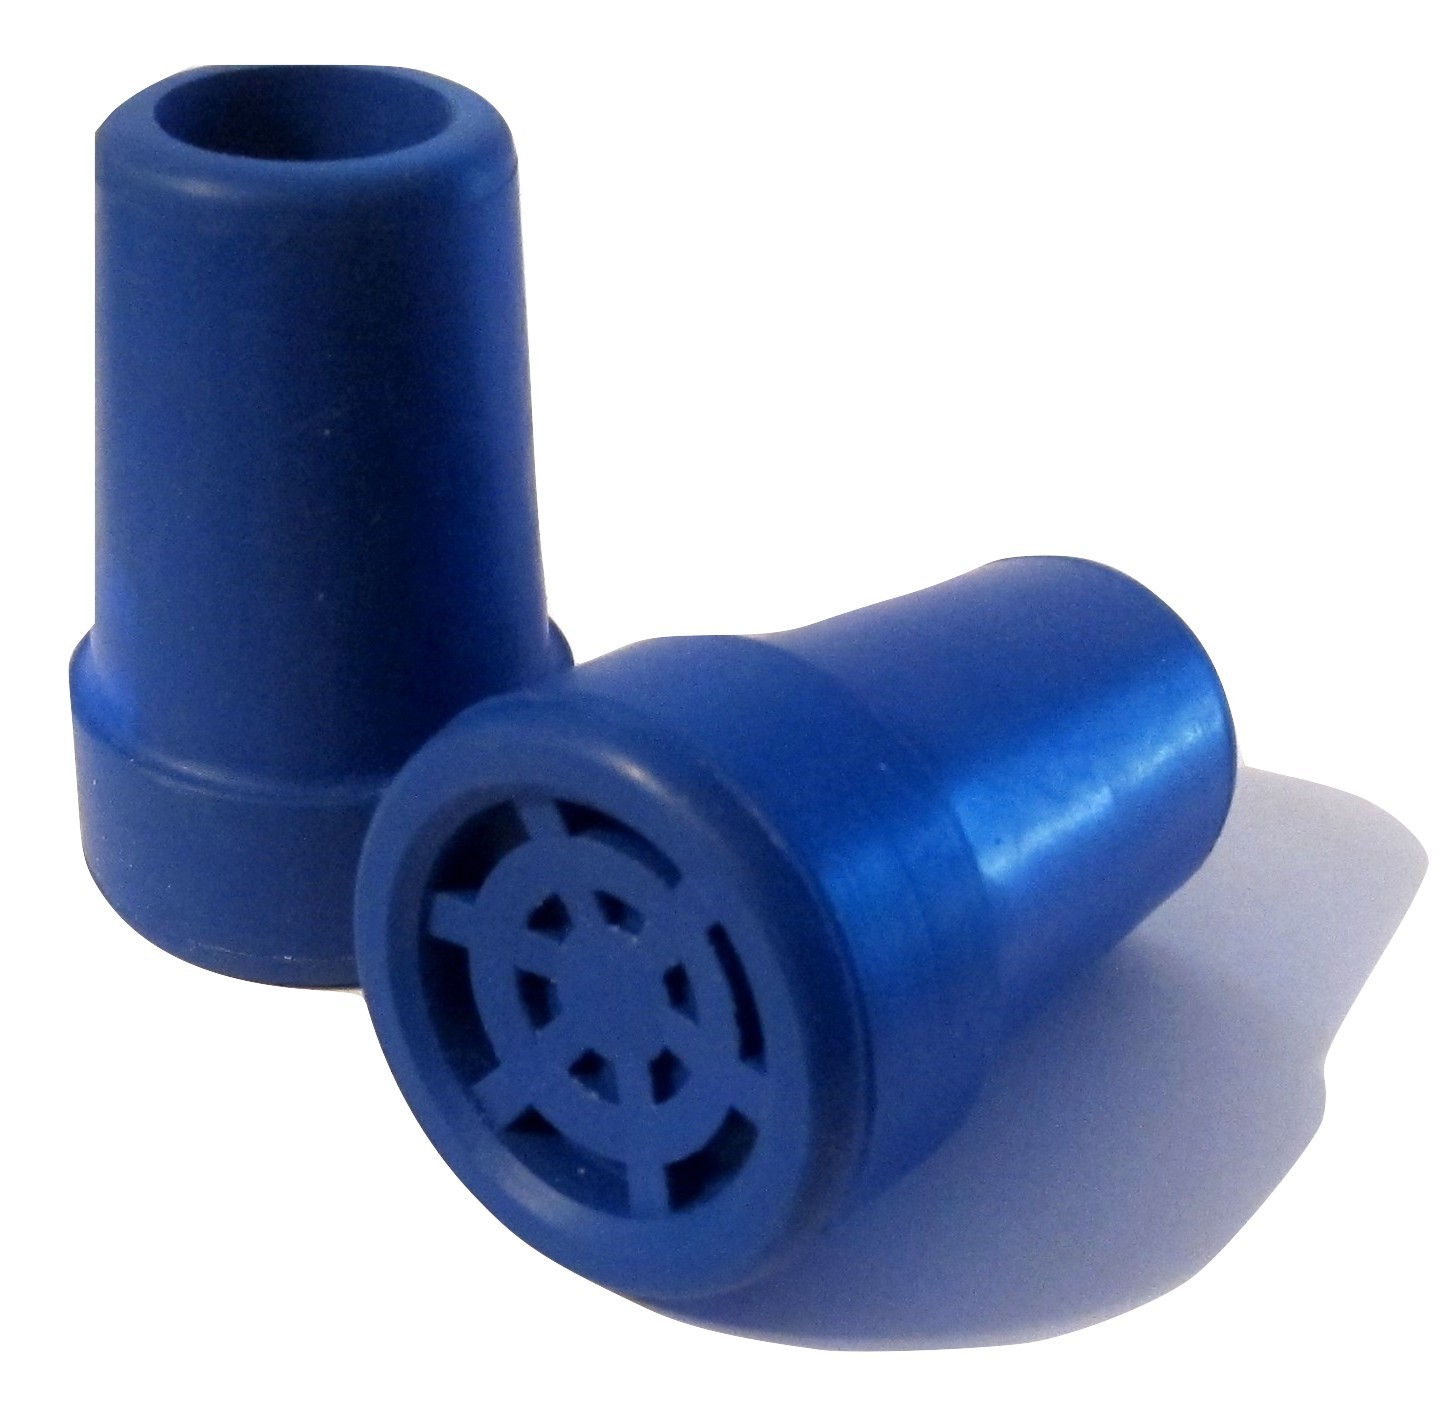 Primary image for Smooth Rubber Cane Tips for Walking Canes - BLUE, 5/8"